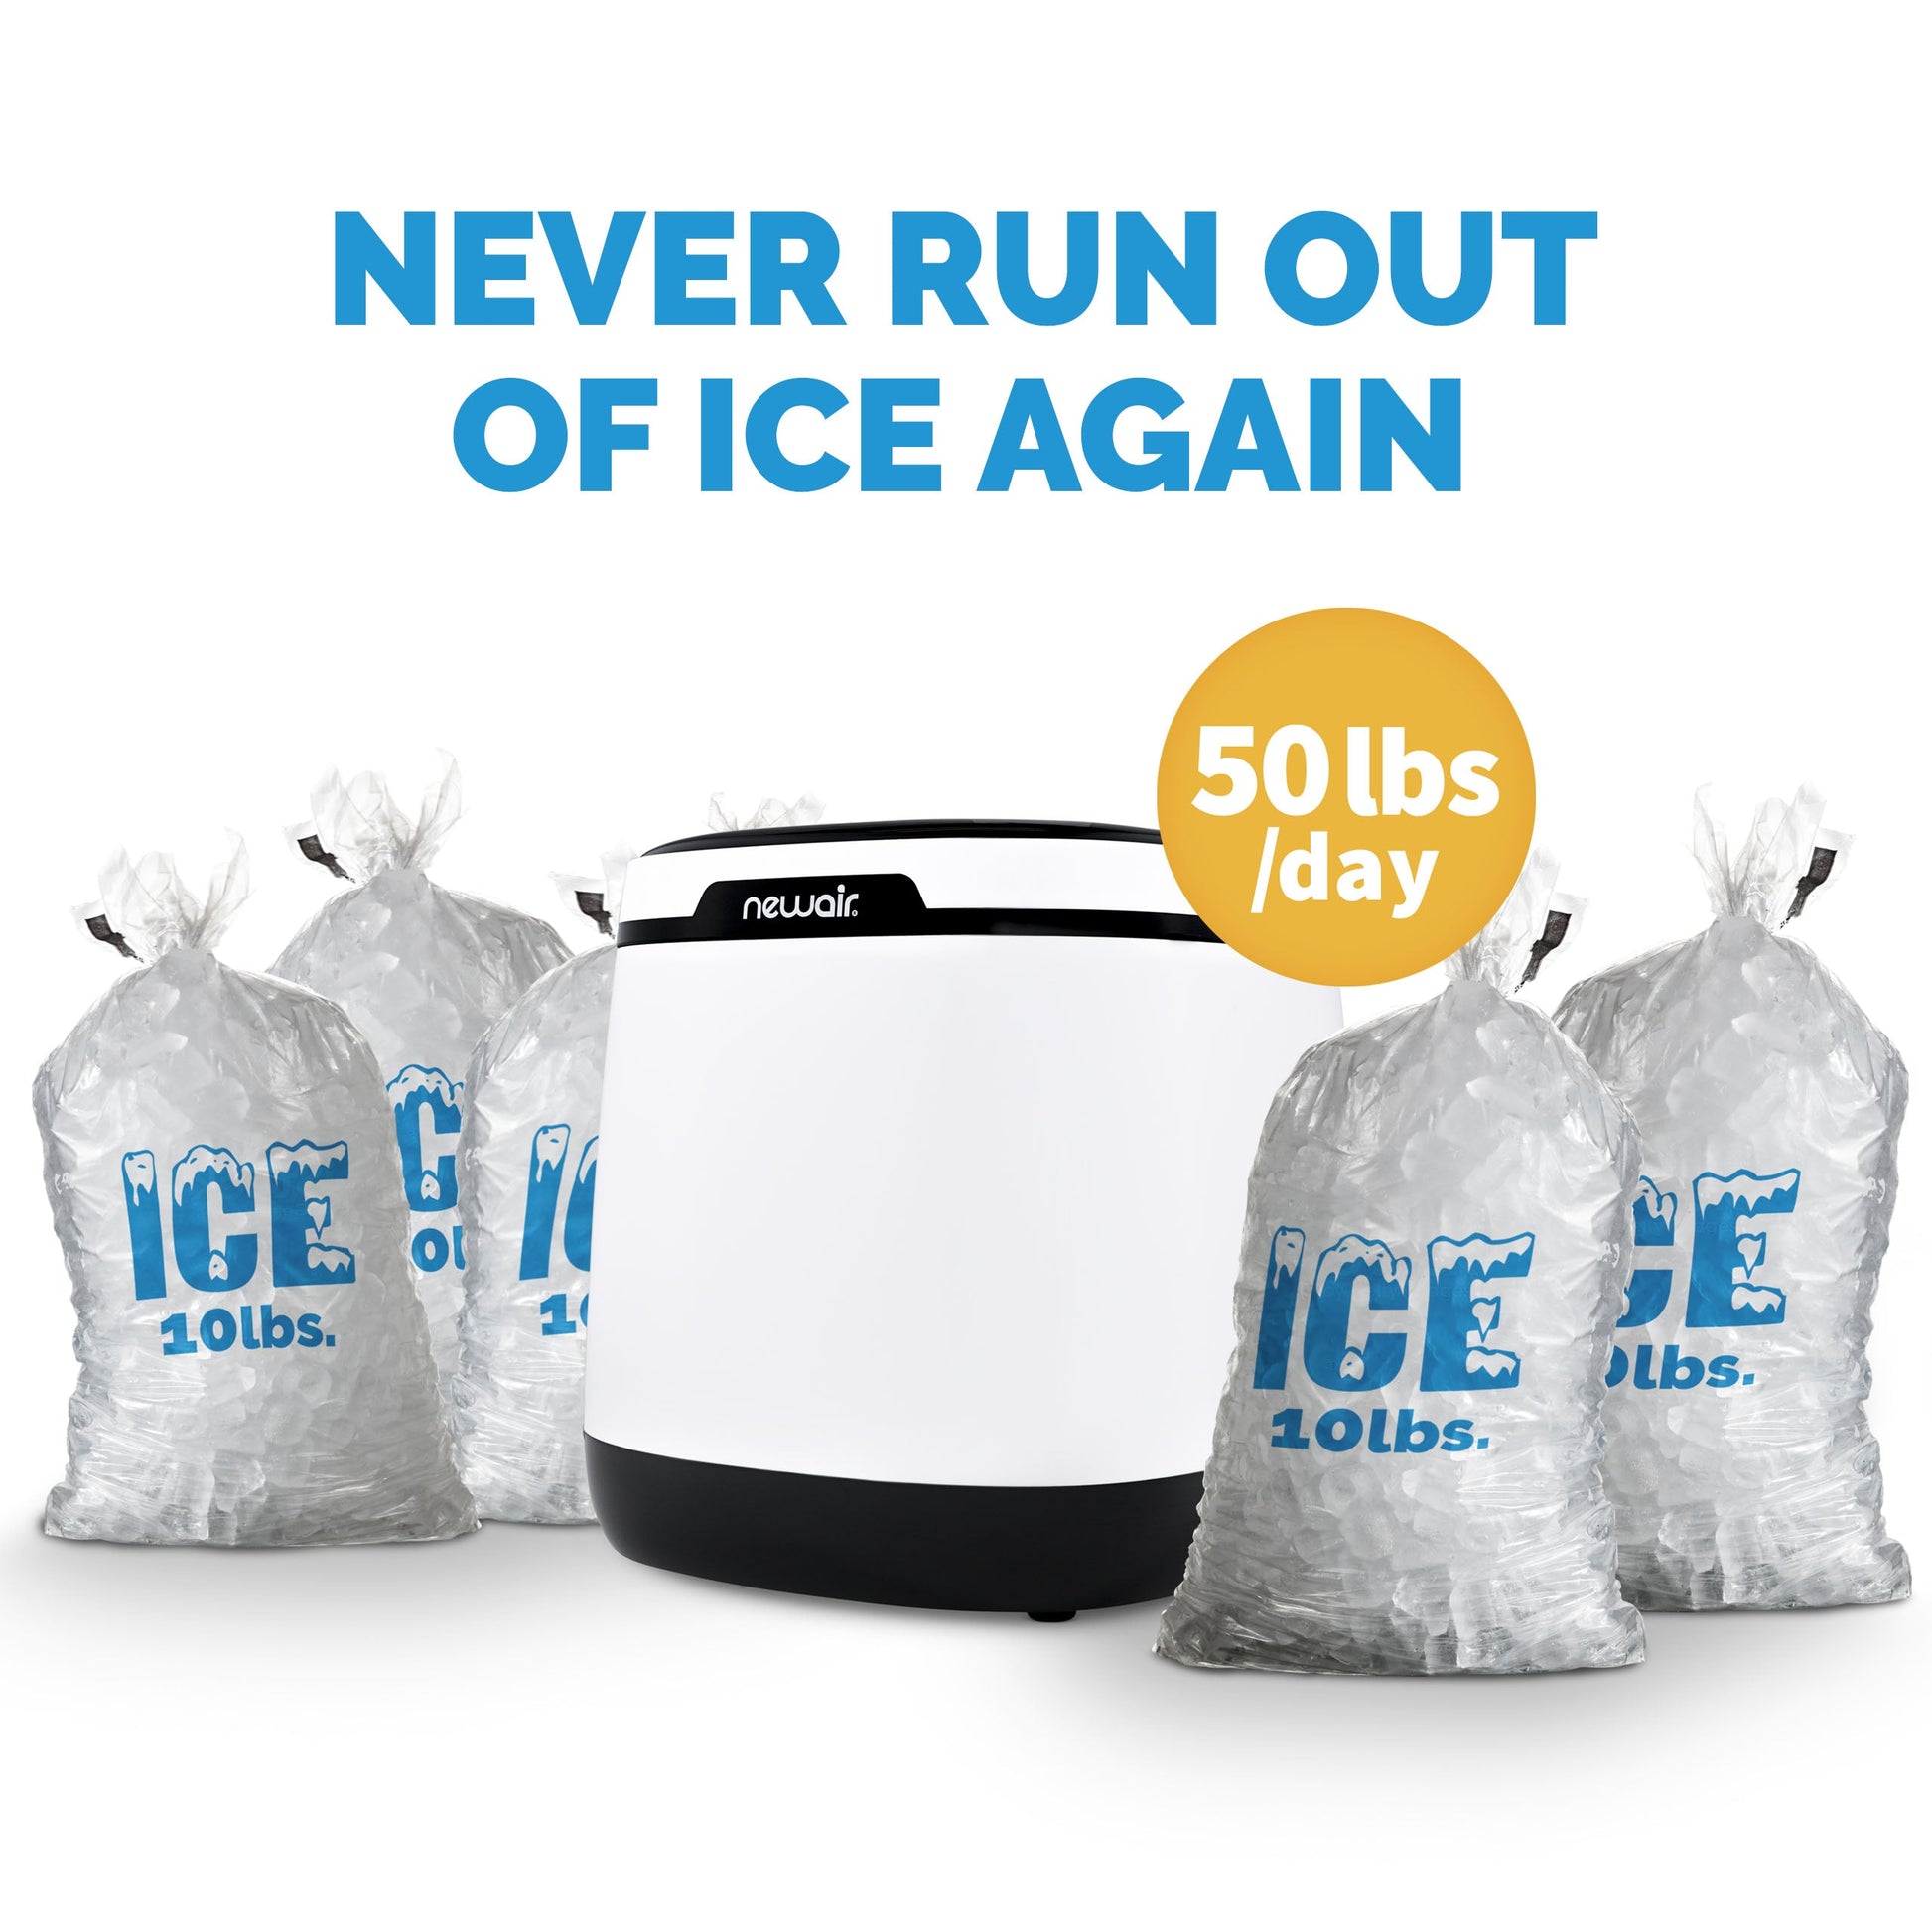 Newair Countertop Ice Maker, 50 lbs. of Ice a Day, One Button Operation and Easy to Clean BPA-Free Parts